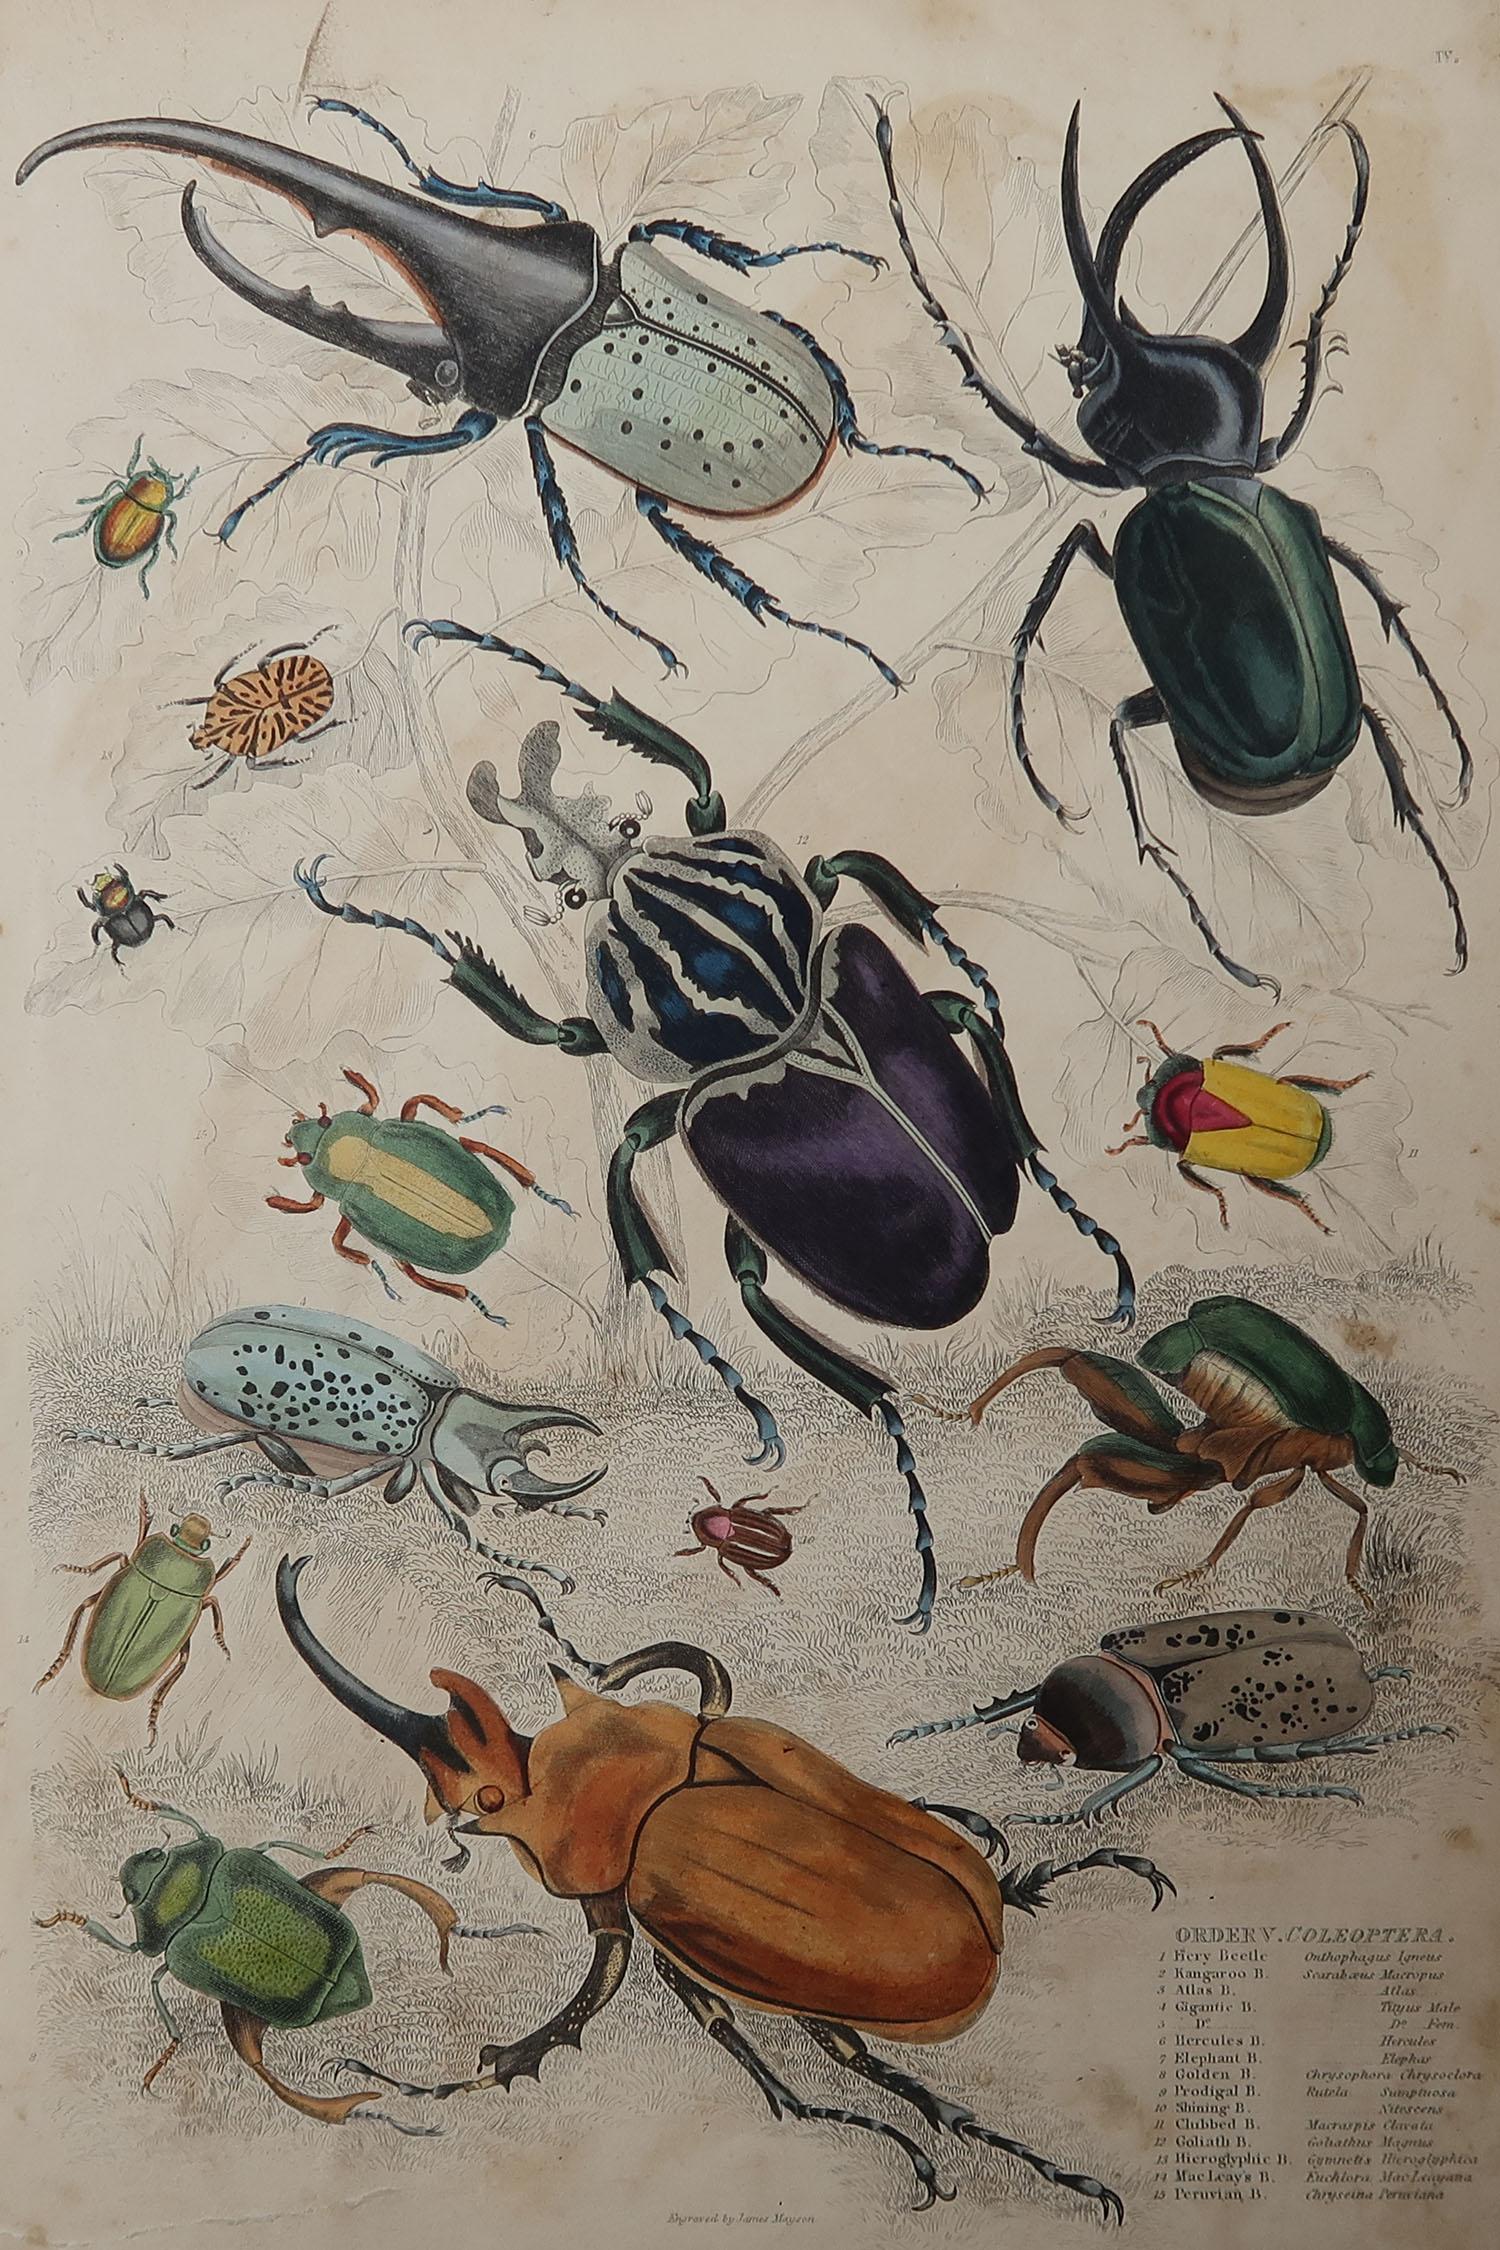 Great image of bugs or beetles

Unframed. It gives you the option of perhaps making a set up using your own choice of frames.

Lithograph after Cpt. brown with original hand color.

Published, circa 1835

Repair to a 2 inch tear at bottom of